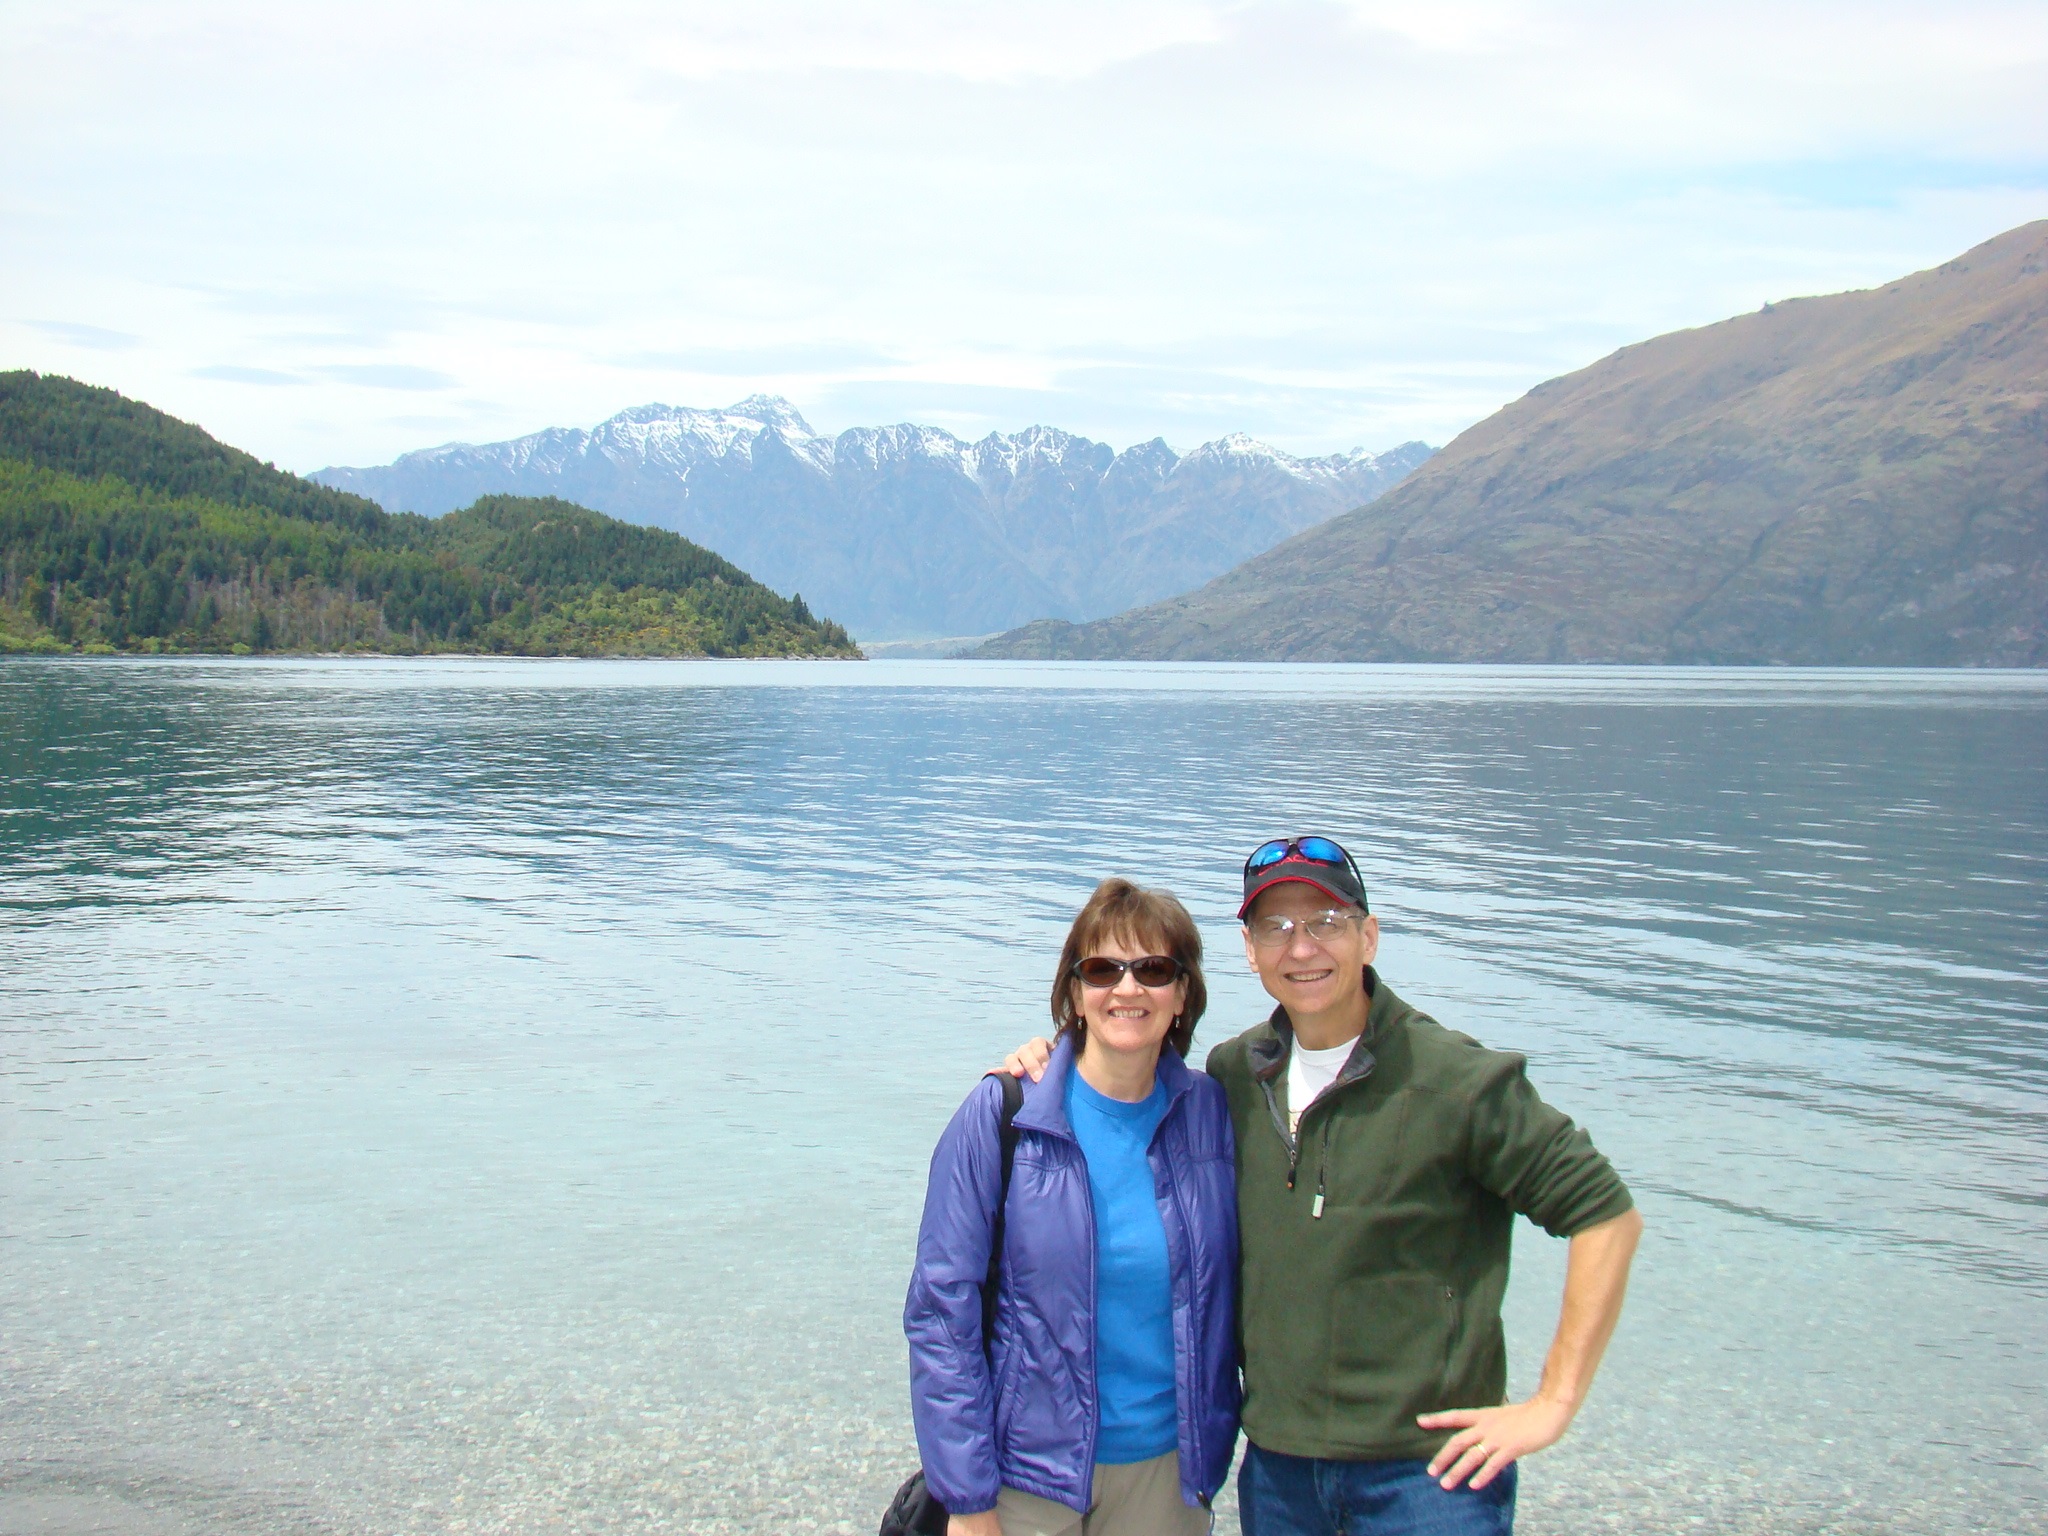 Jim and Ruth taking a photo in front of a lake with mountains in the background